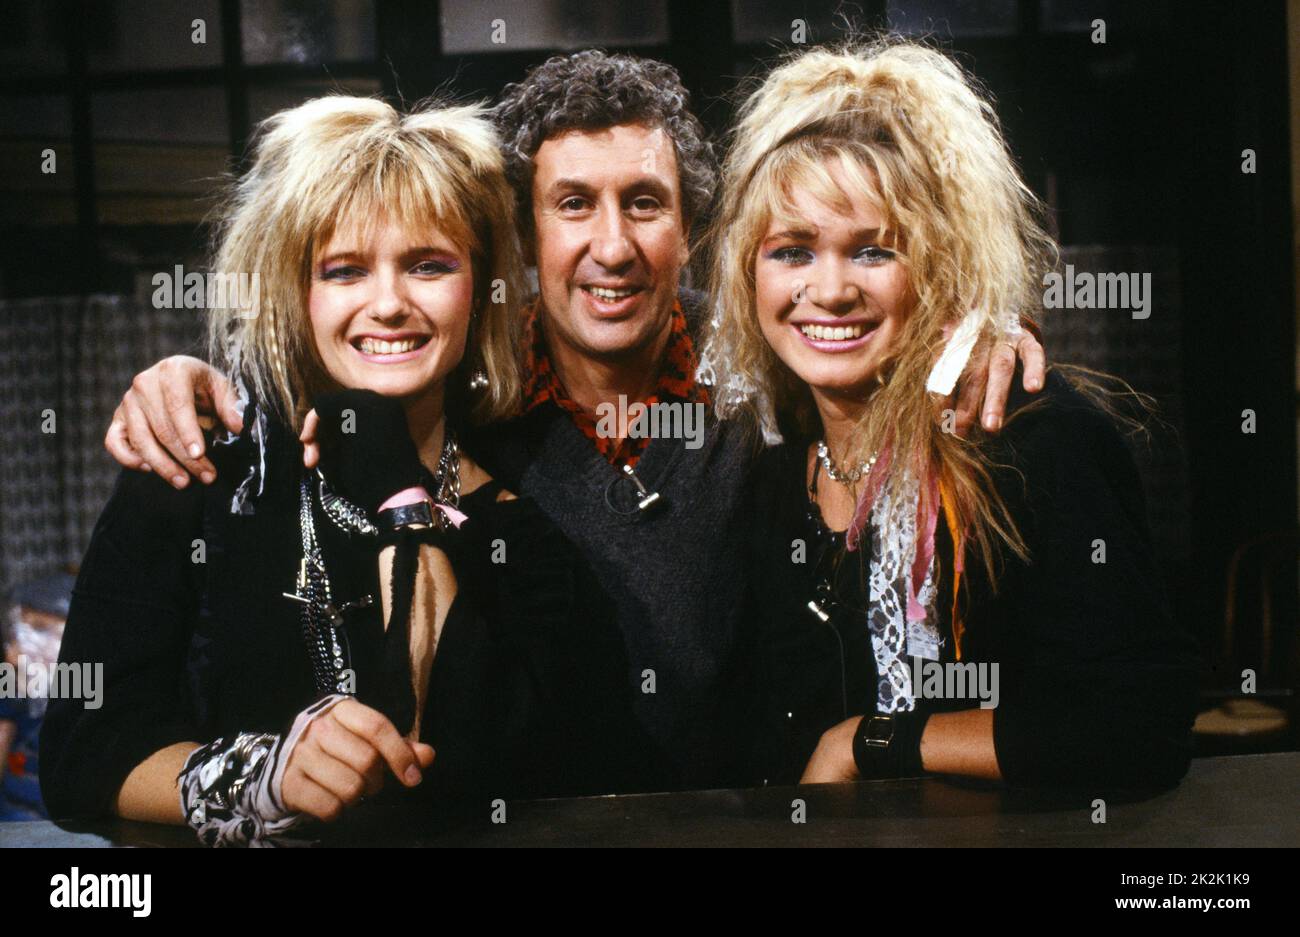 Stéphane Collaro and the Norwegian pop group Dollie de Luxe (Ingrid Bjornov and Benedicte Adrian) on the set of the TV show 'Cocoricocoboy' in 1985. Stock Photo